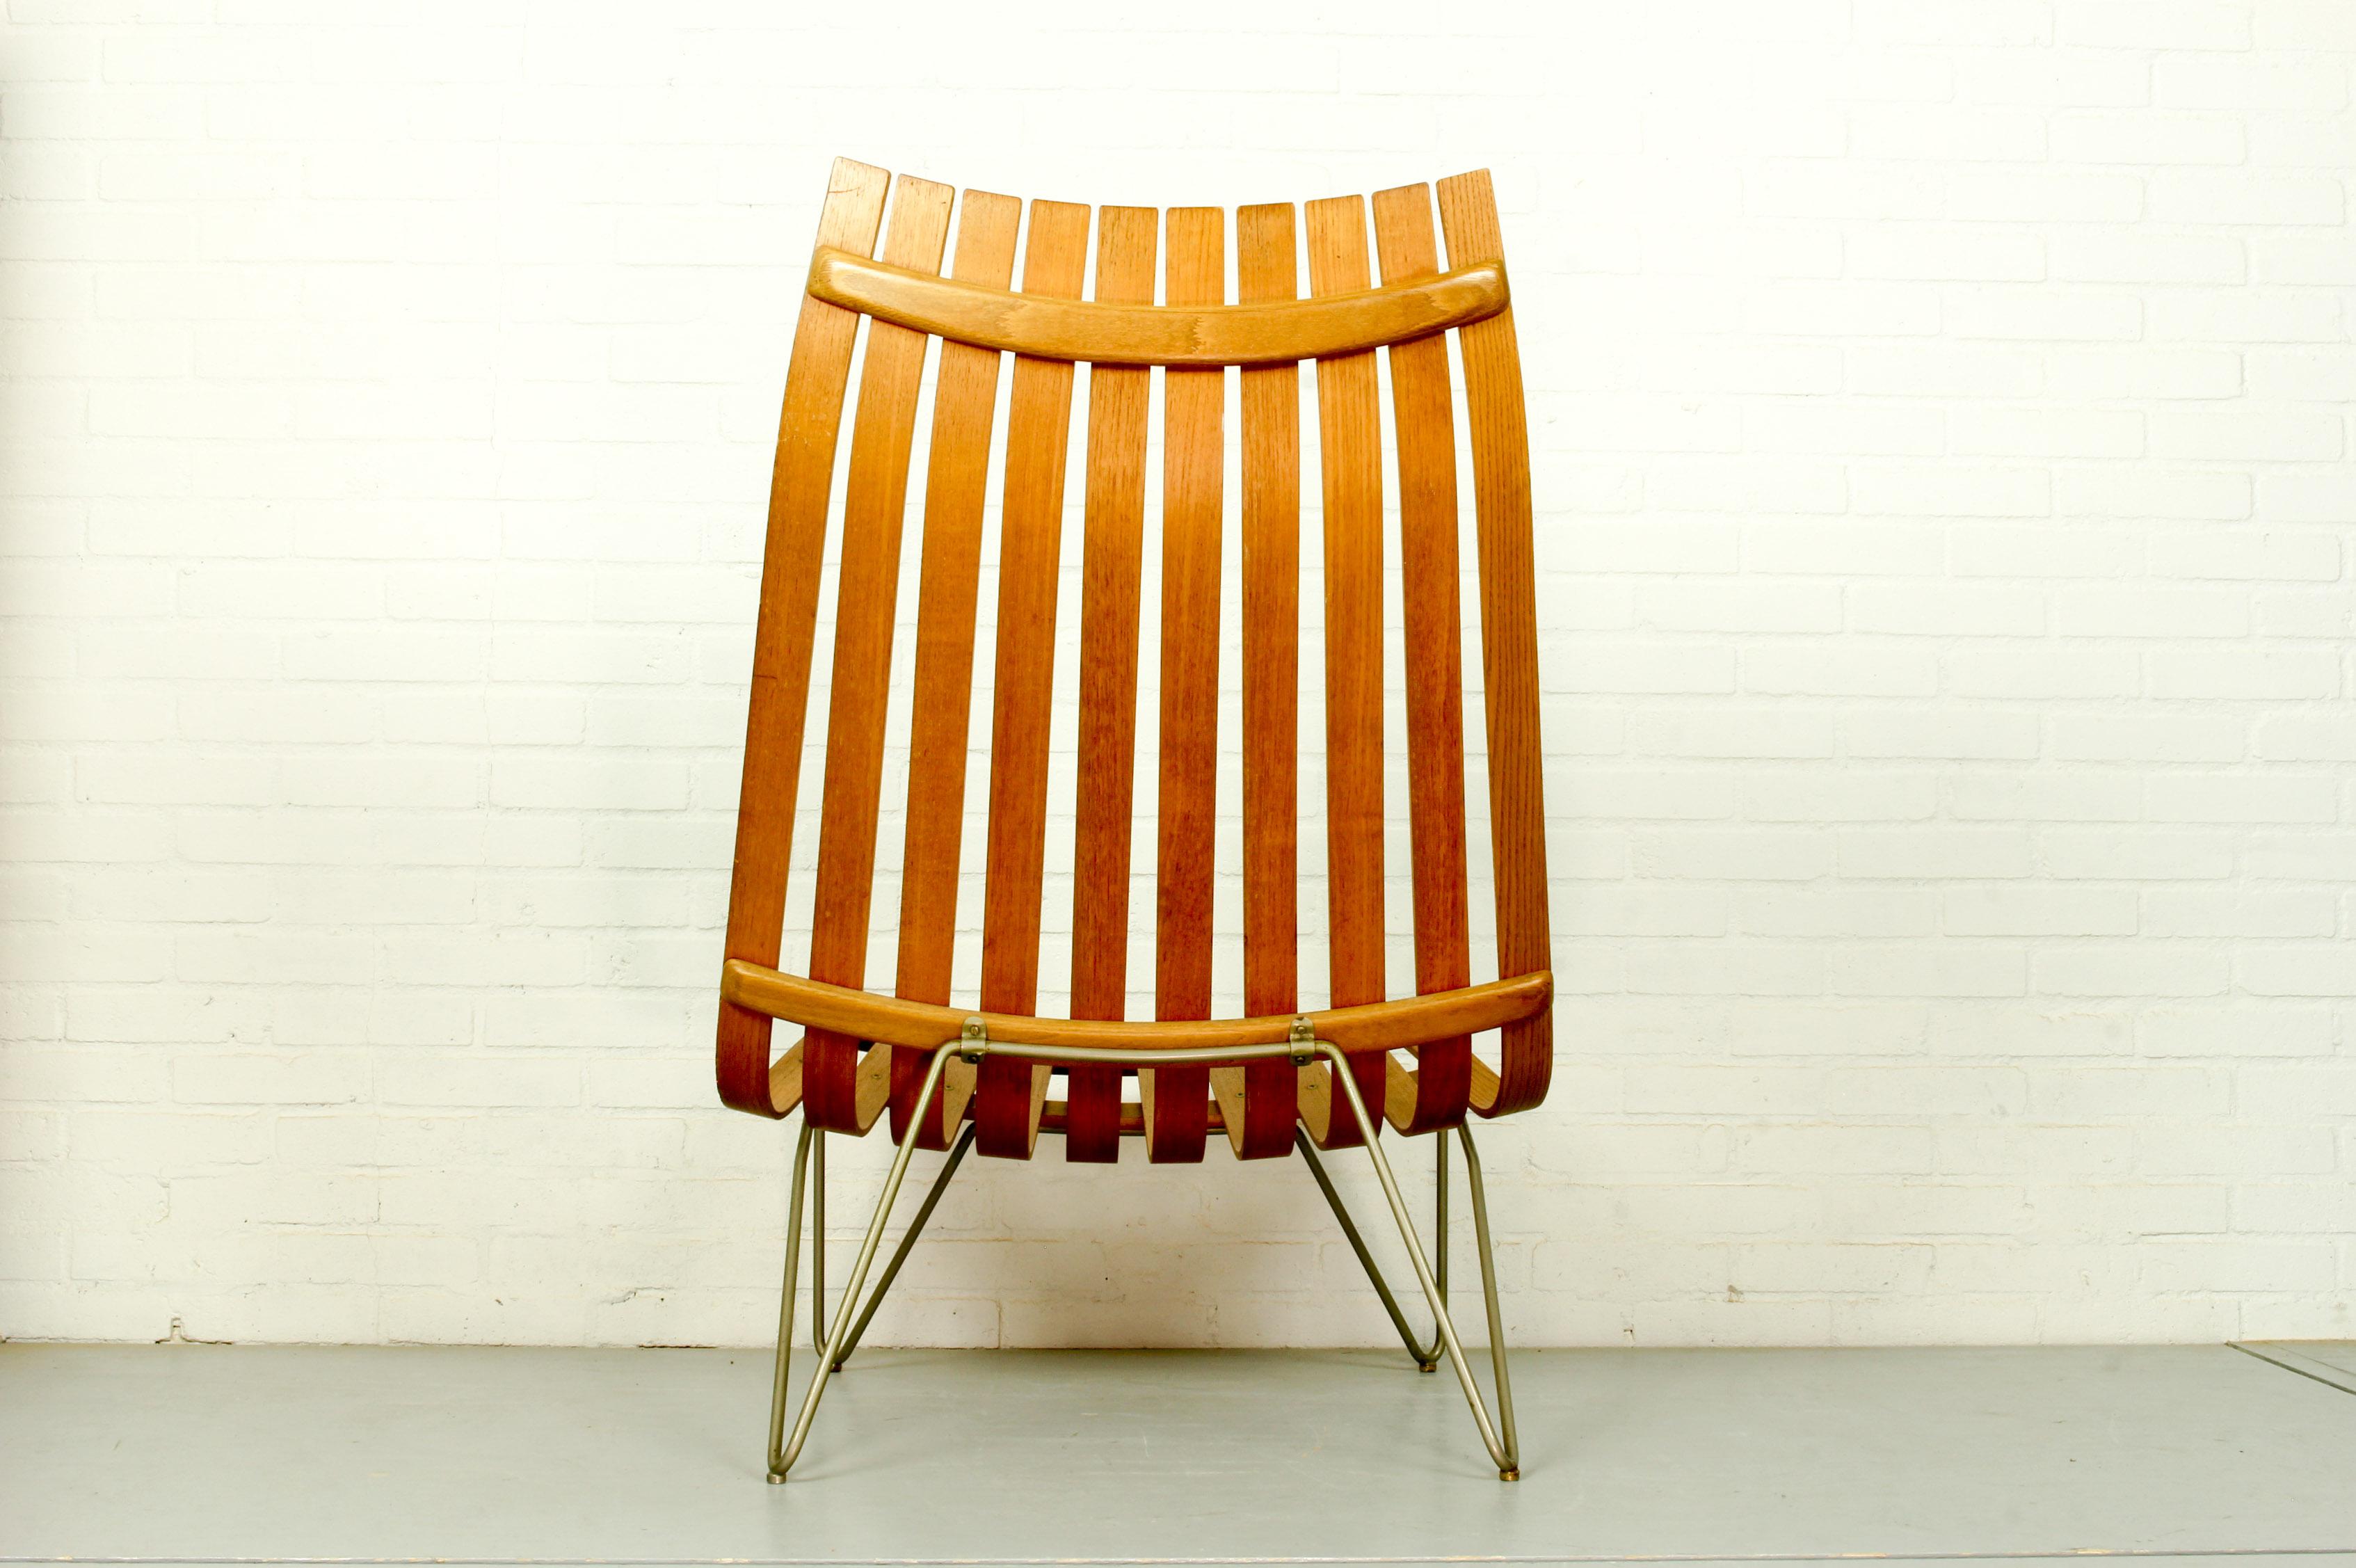 Plated Scandia Lounge Chair by Hans Brattrud for Hove Mobler, 1960s